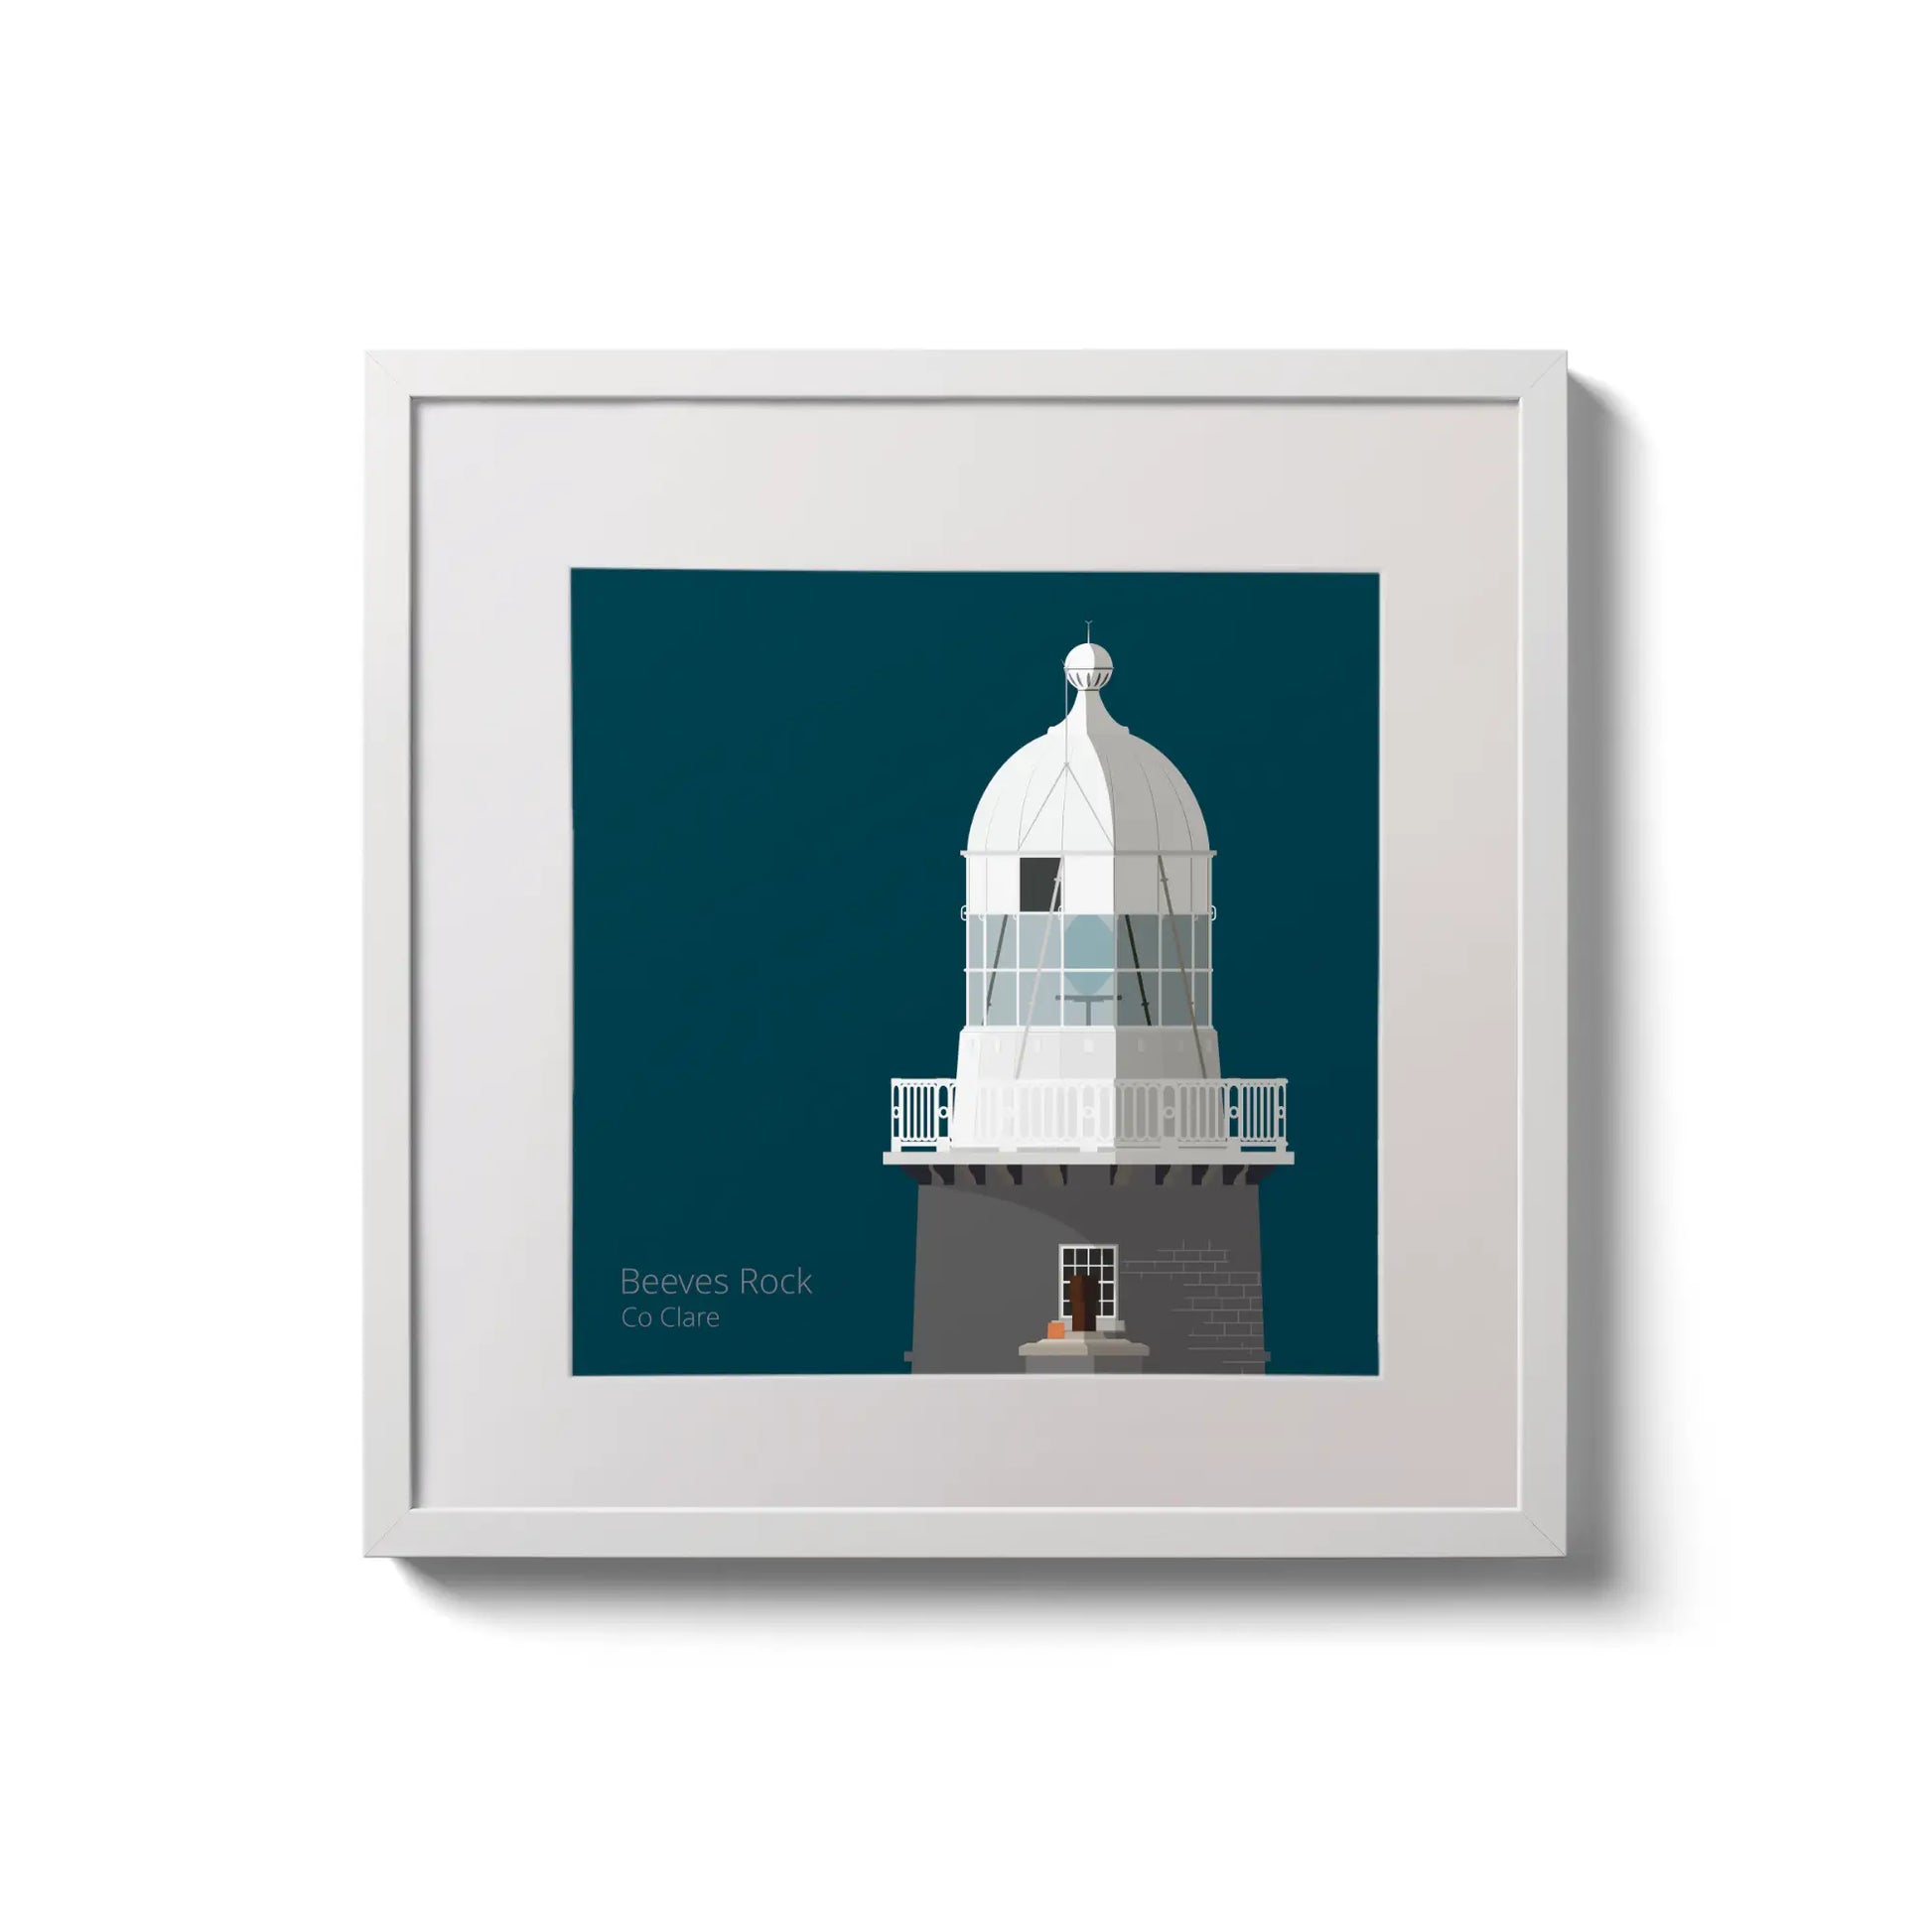 Illustration of Beeves Rock lighthouse on a midnight blue background,  in a white square frame measuring 20x20cm.